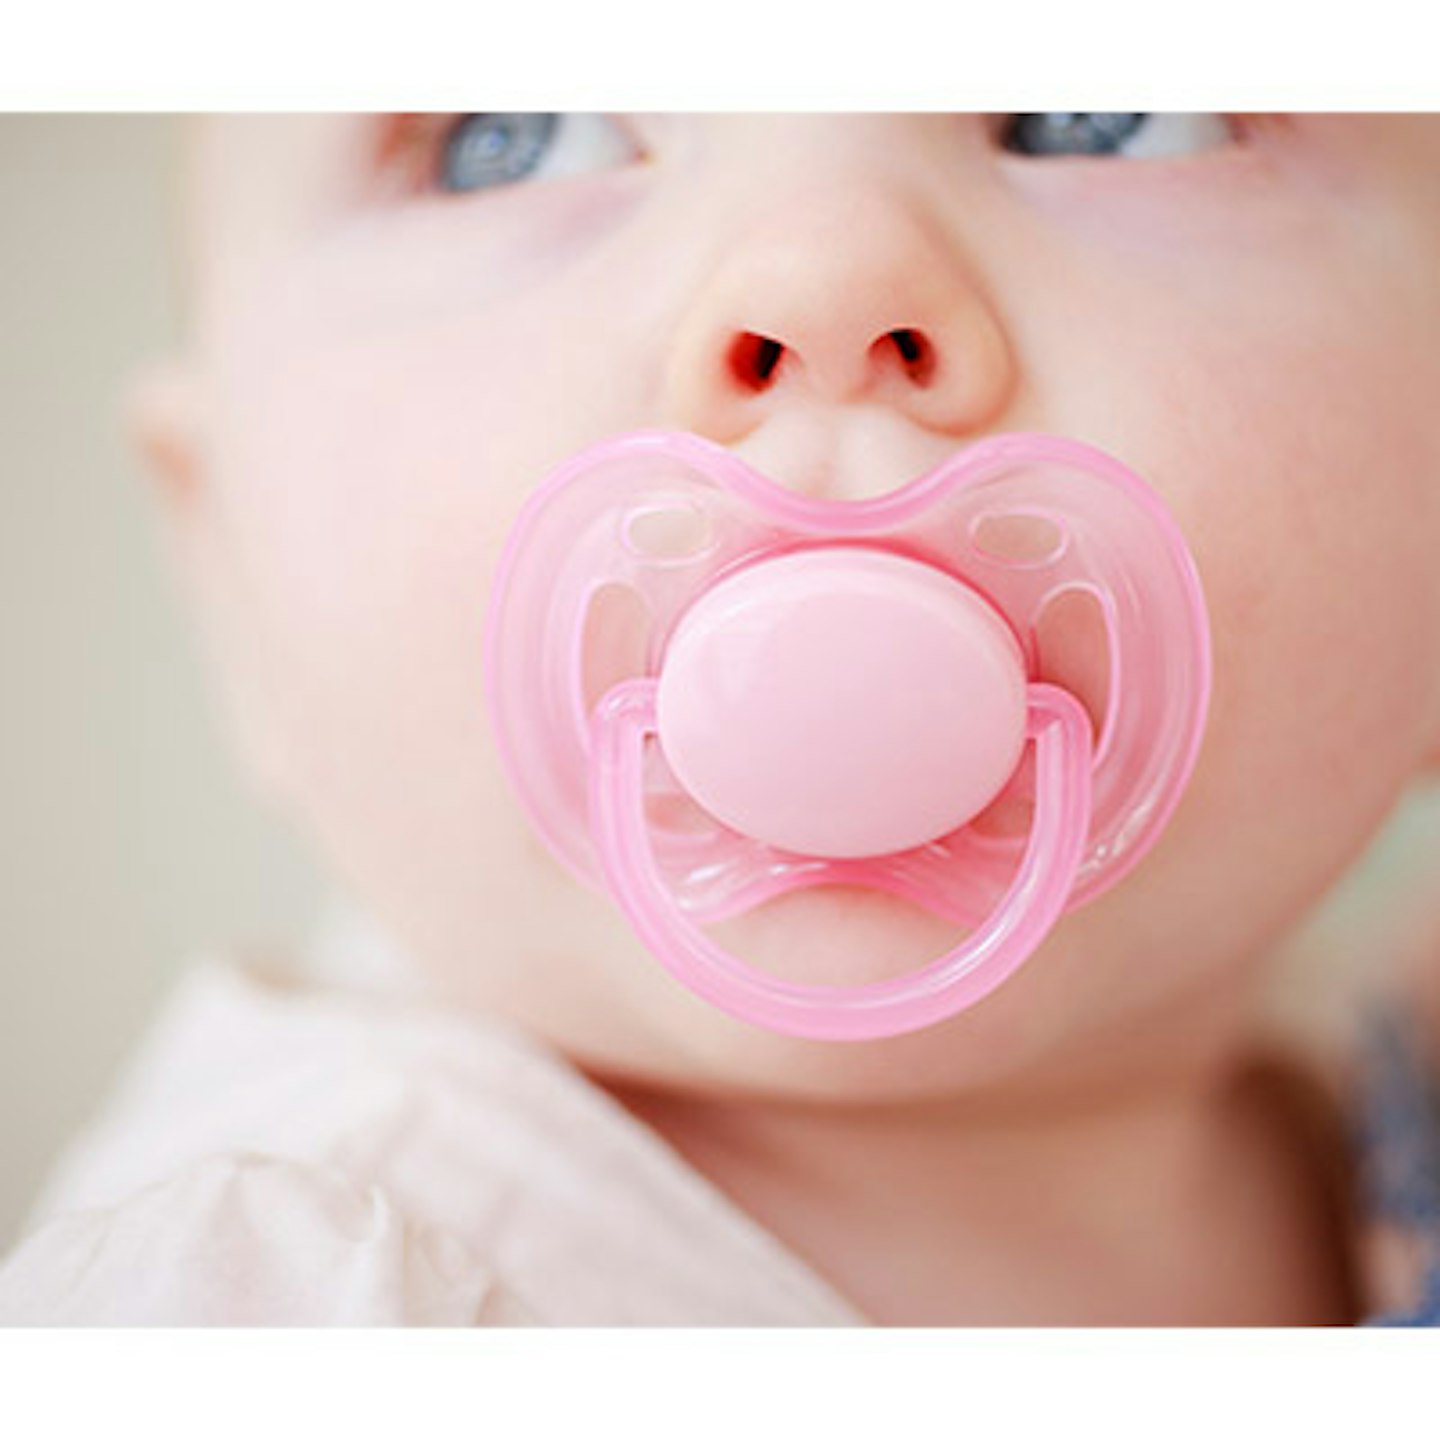 baby with dummy in her mouth